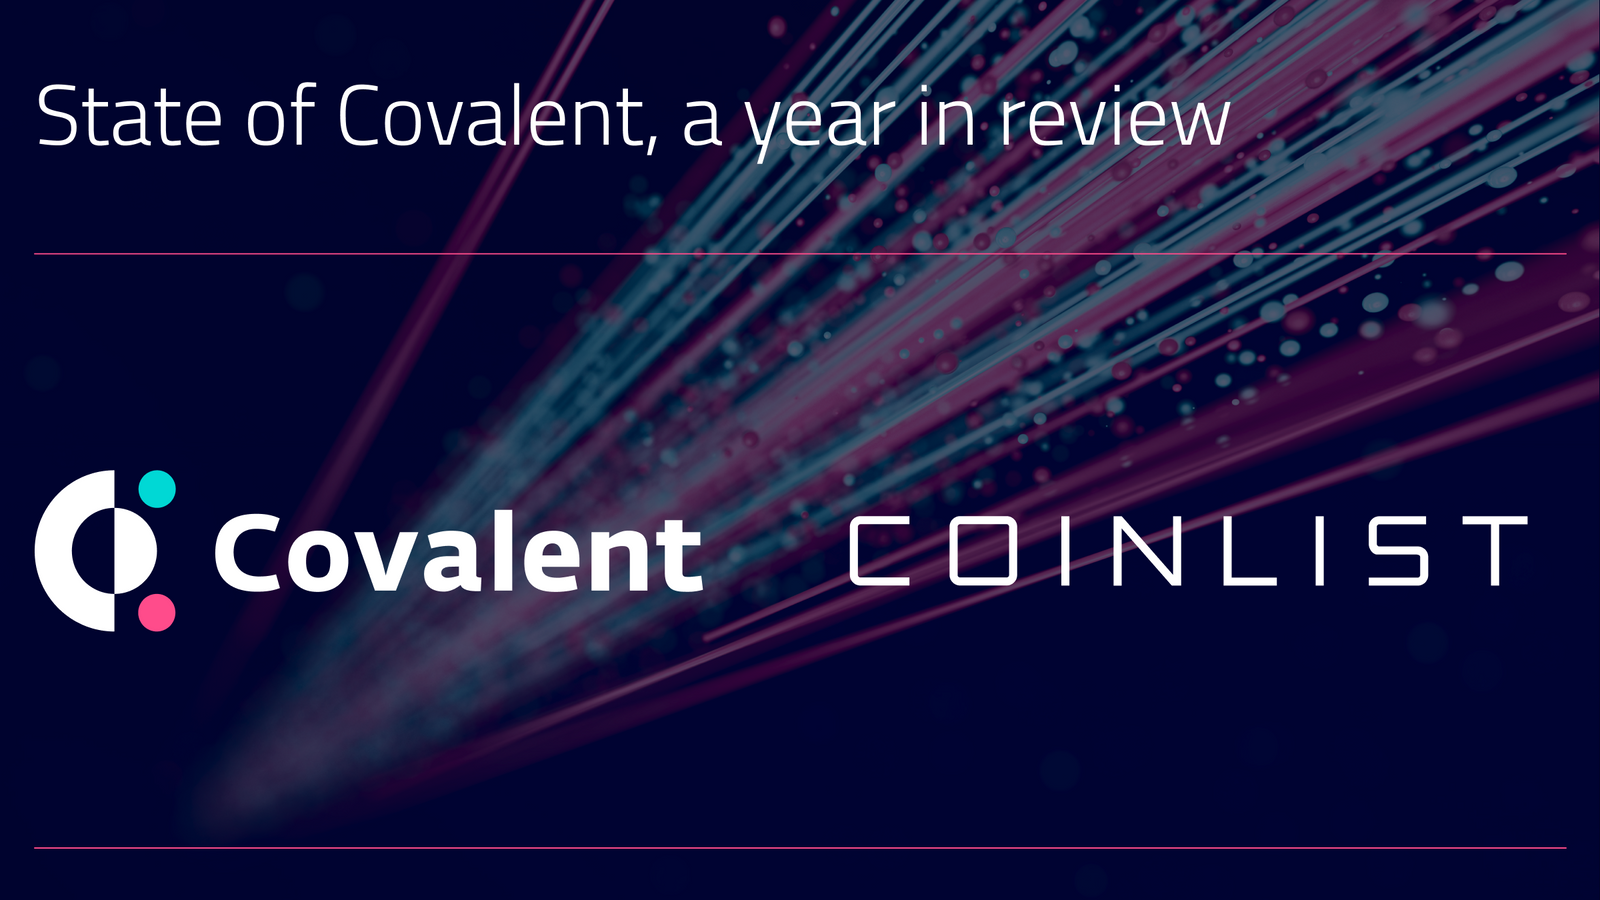 The State of Covalent: A Year in Review